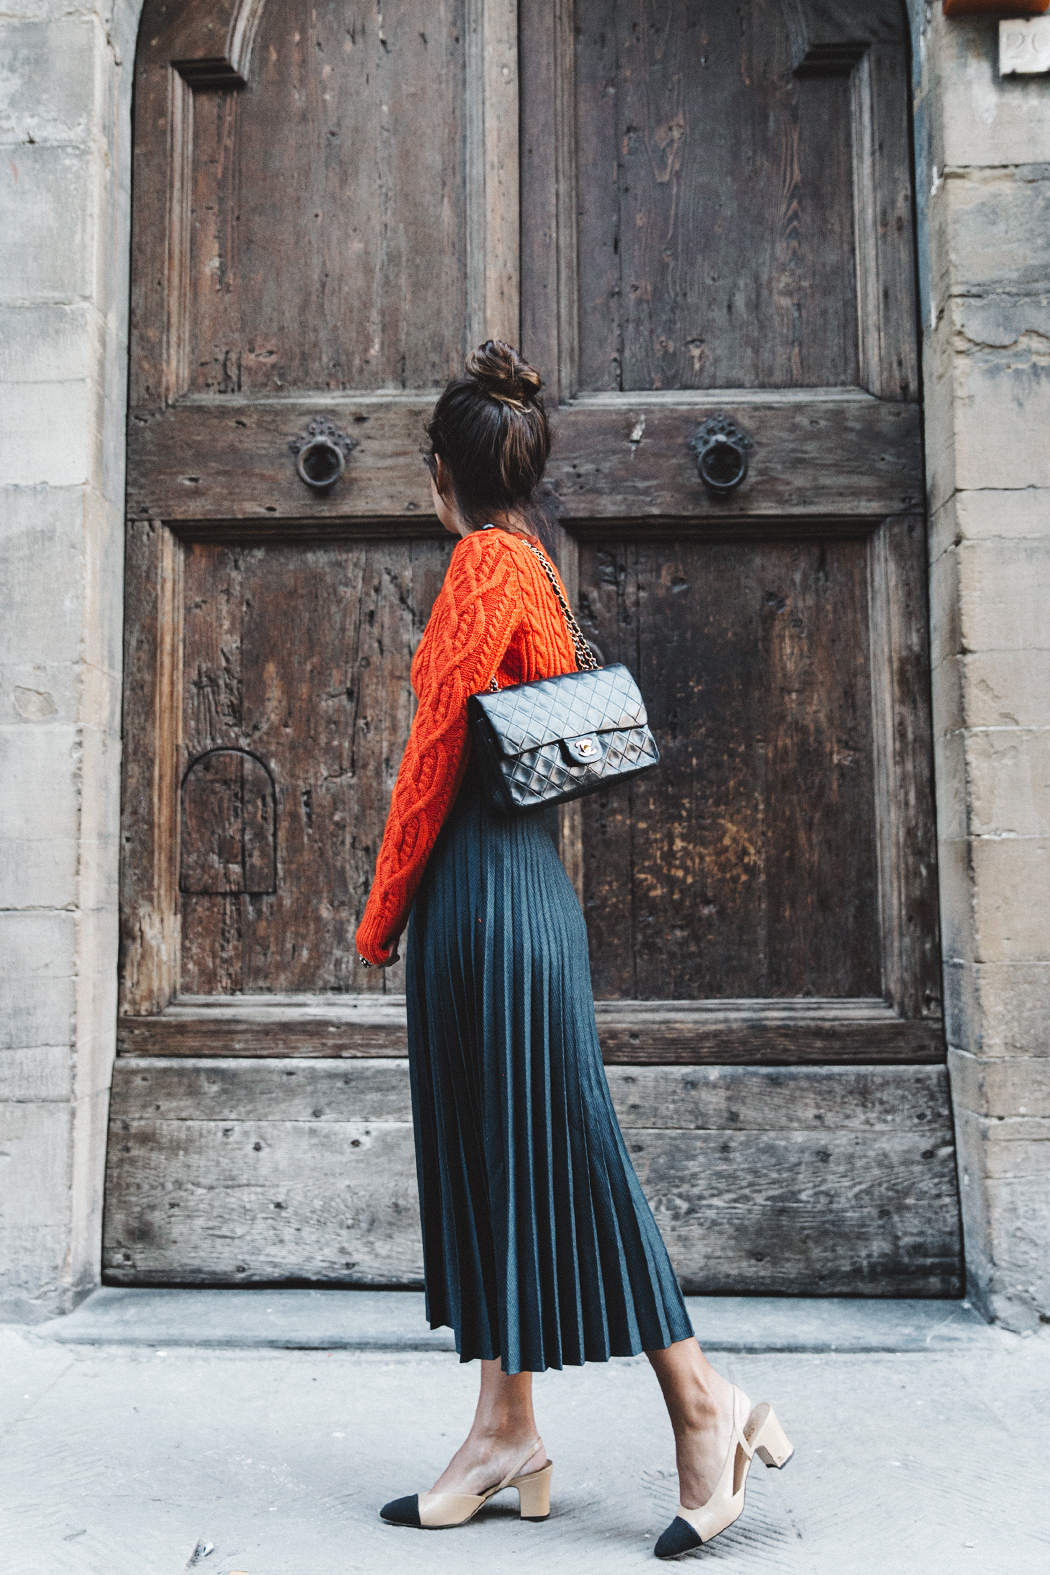 Orange_Sweater-Midi_Skirt-Slingback_Shoes_Chanel-Vintage_Bag-Florence-Outfit-Street_Style-10